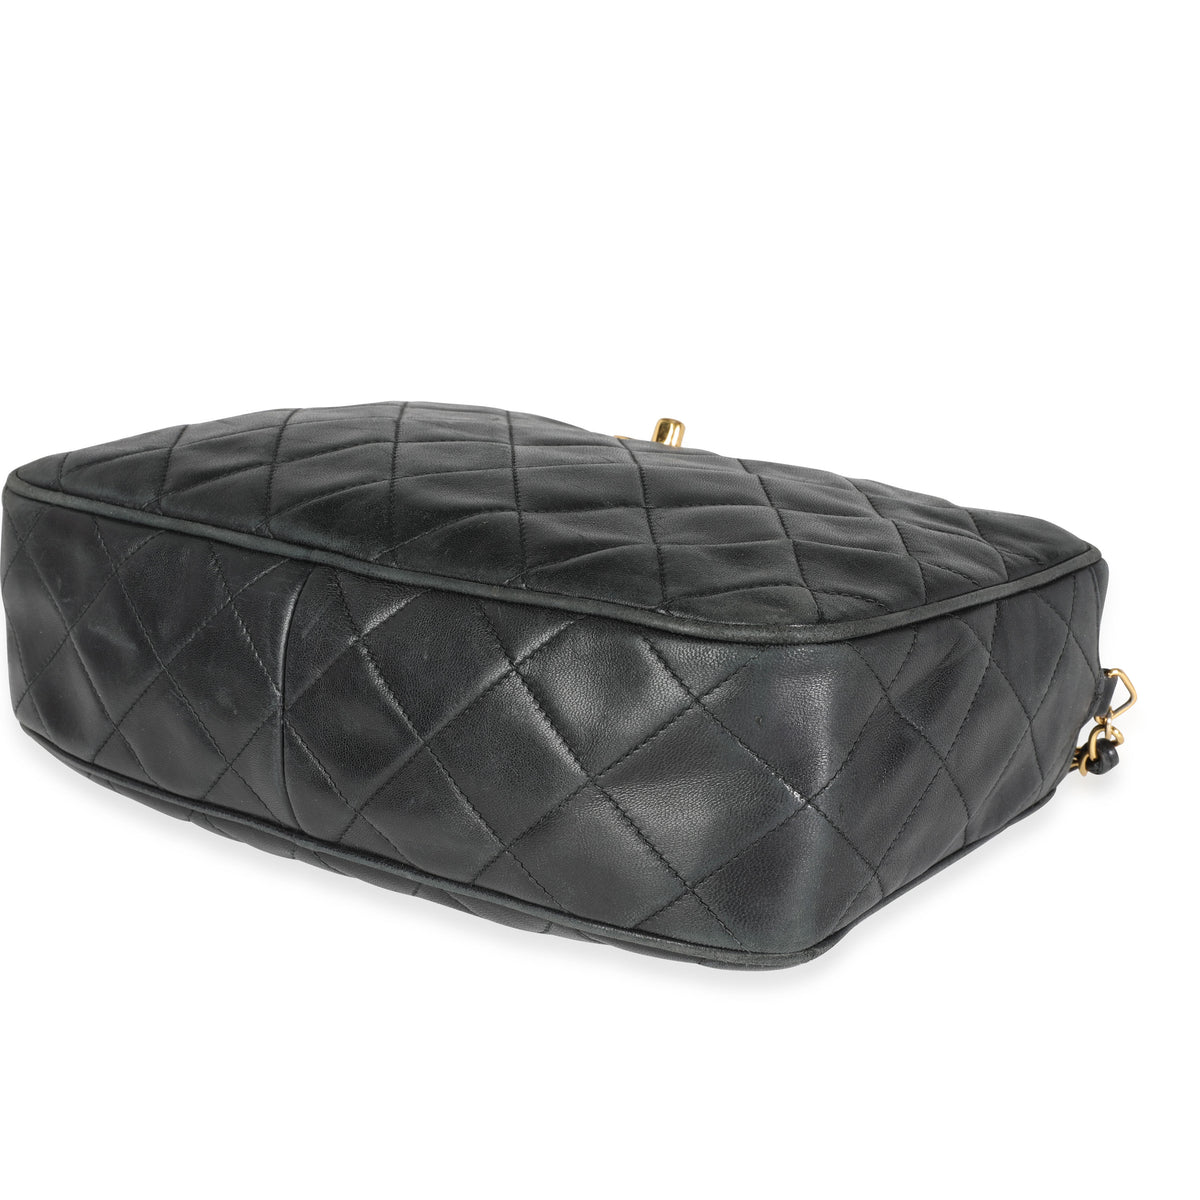 Chanel Vintage Quilted Lambskin Shoulder or Cross Body Bag Top CC Clasp  Black